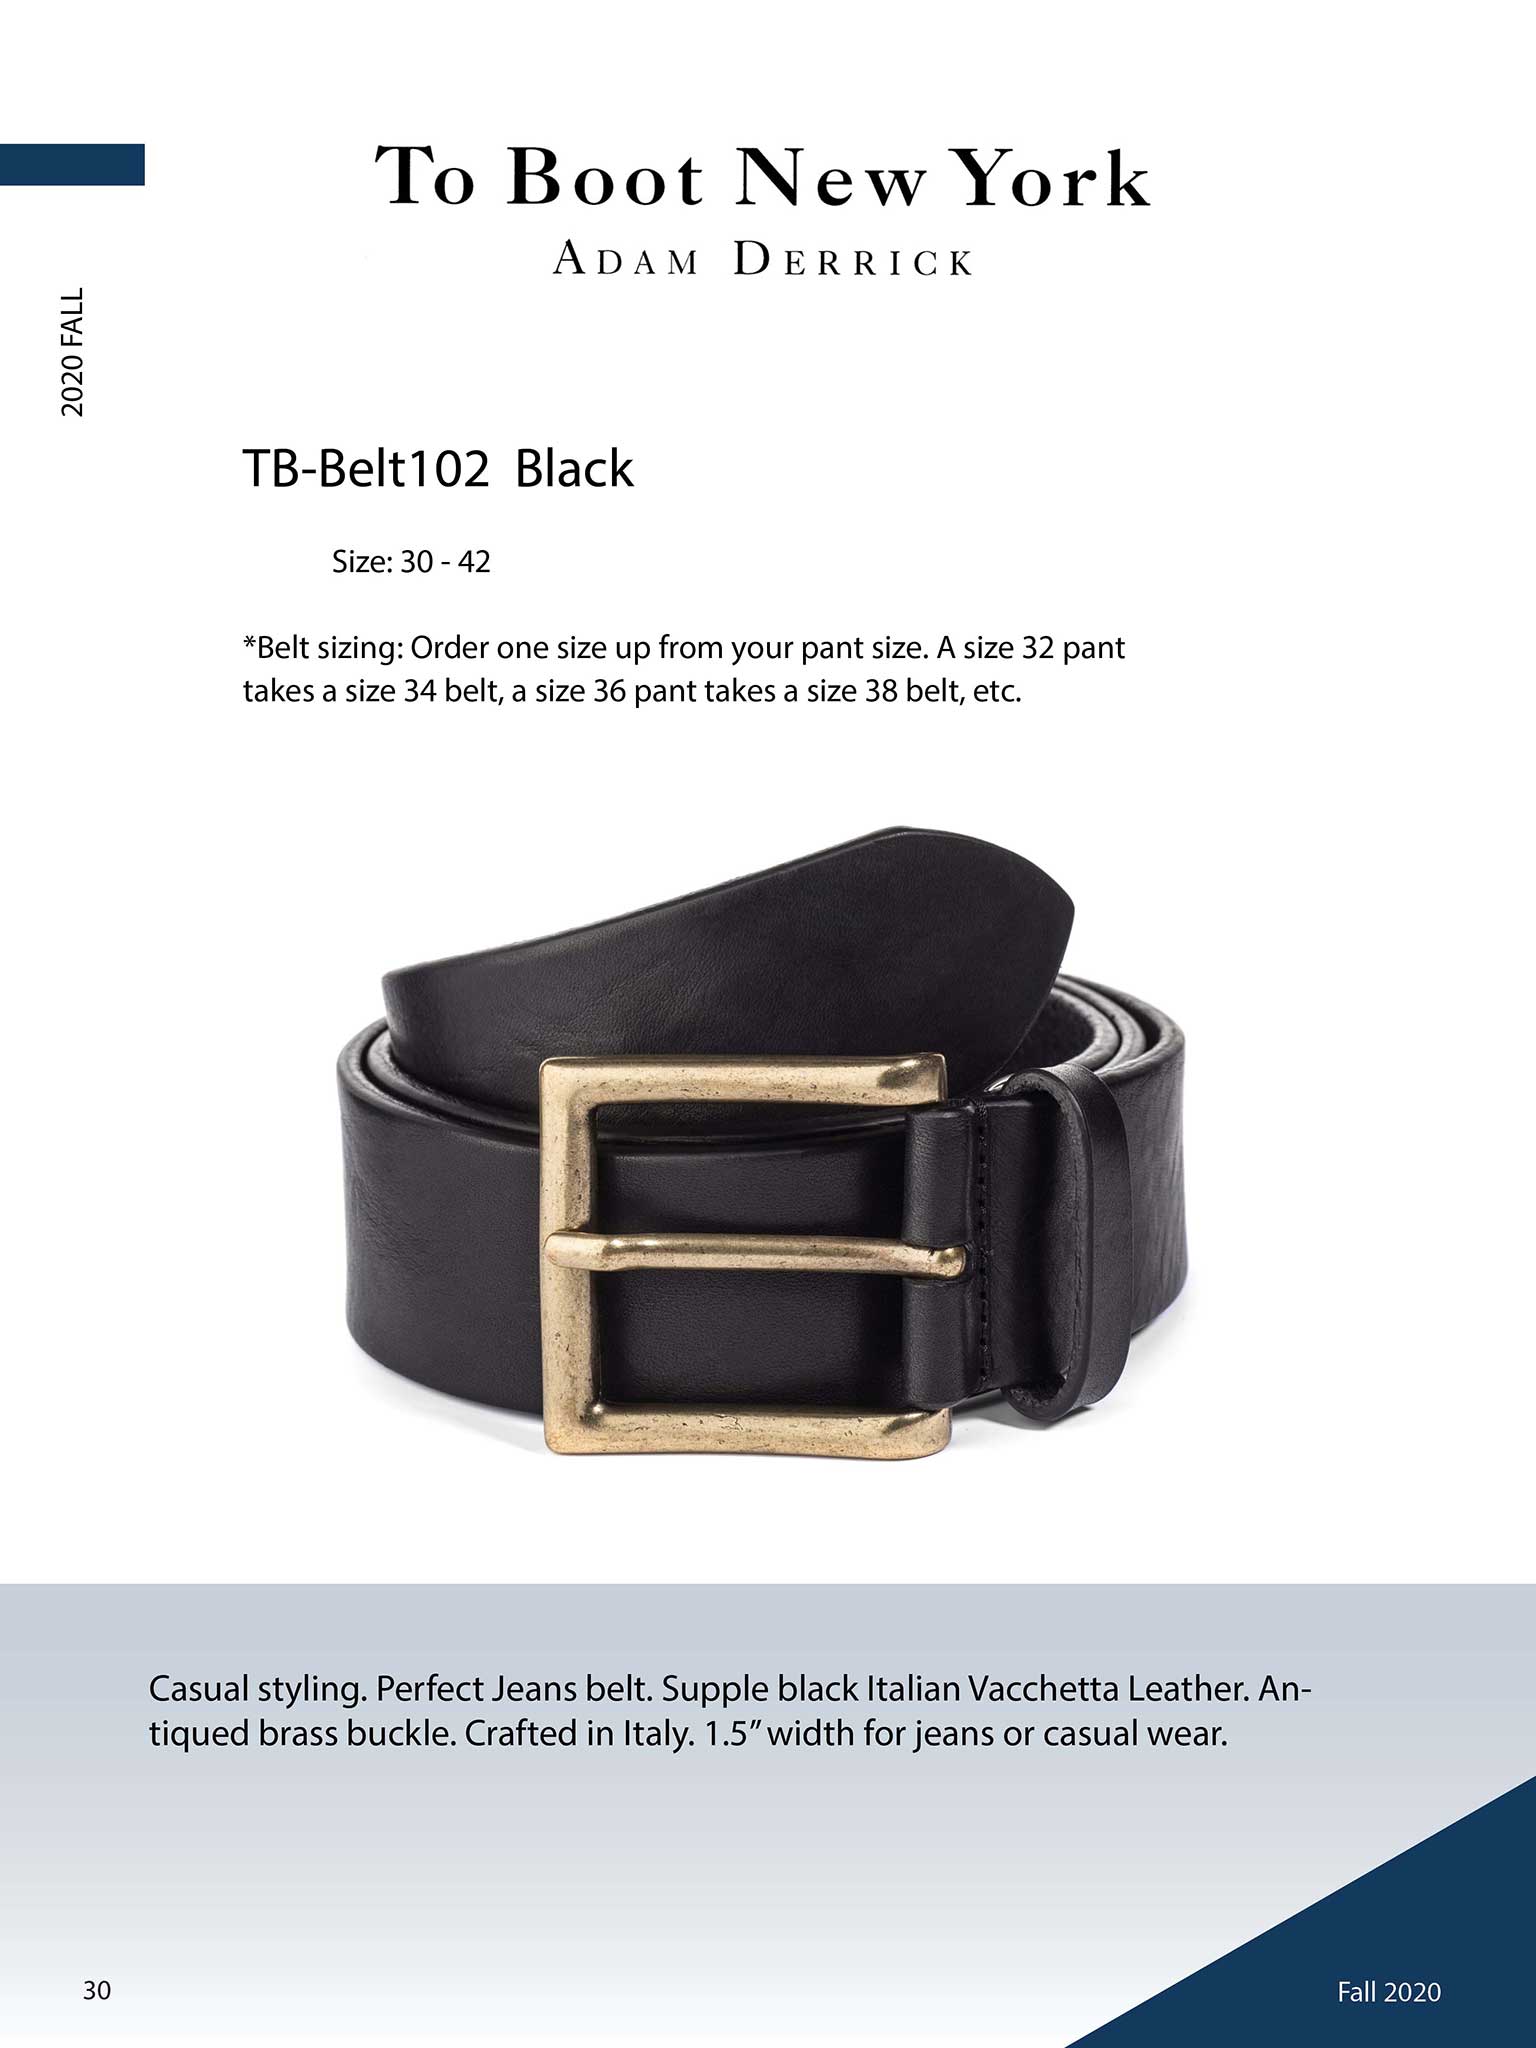 To Boot New York                                                                                                                                                                                                                                          , Black Leather Belt by To Boot New York